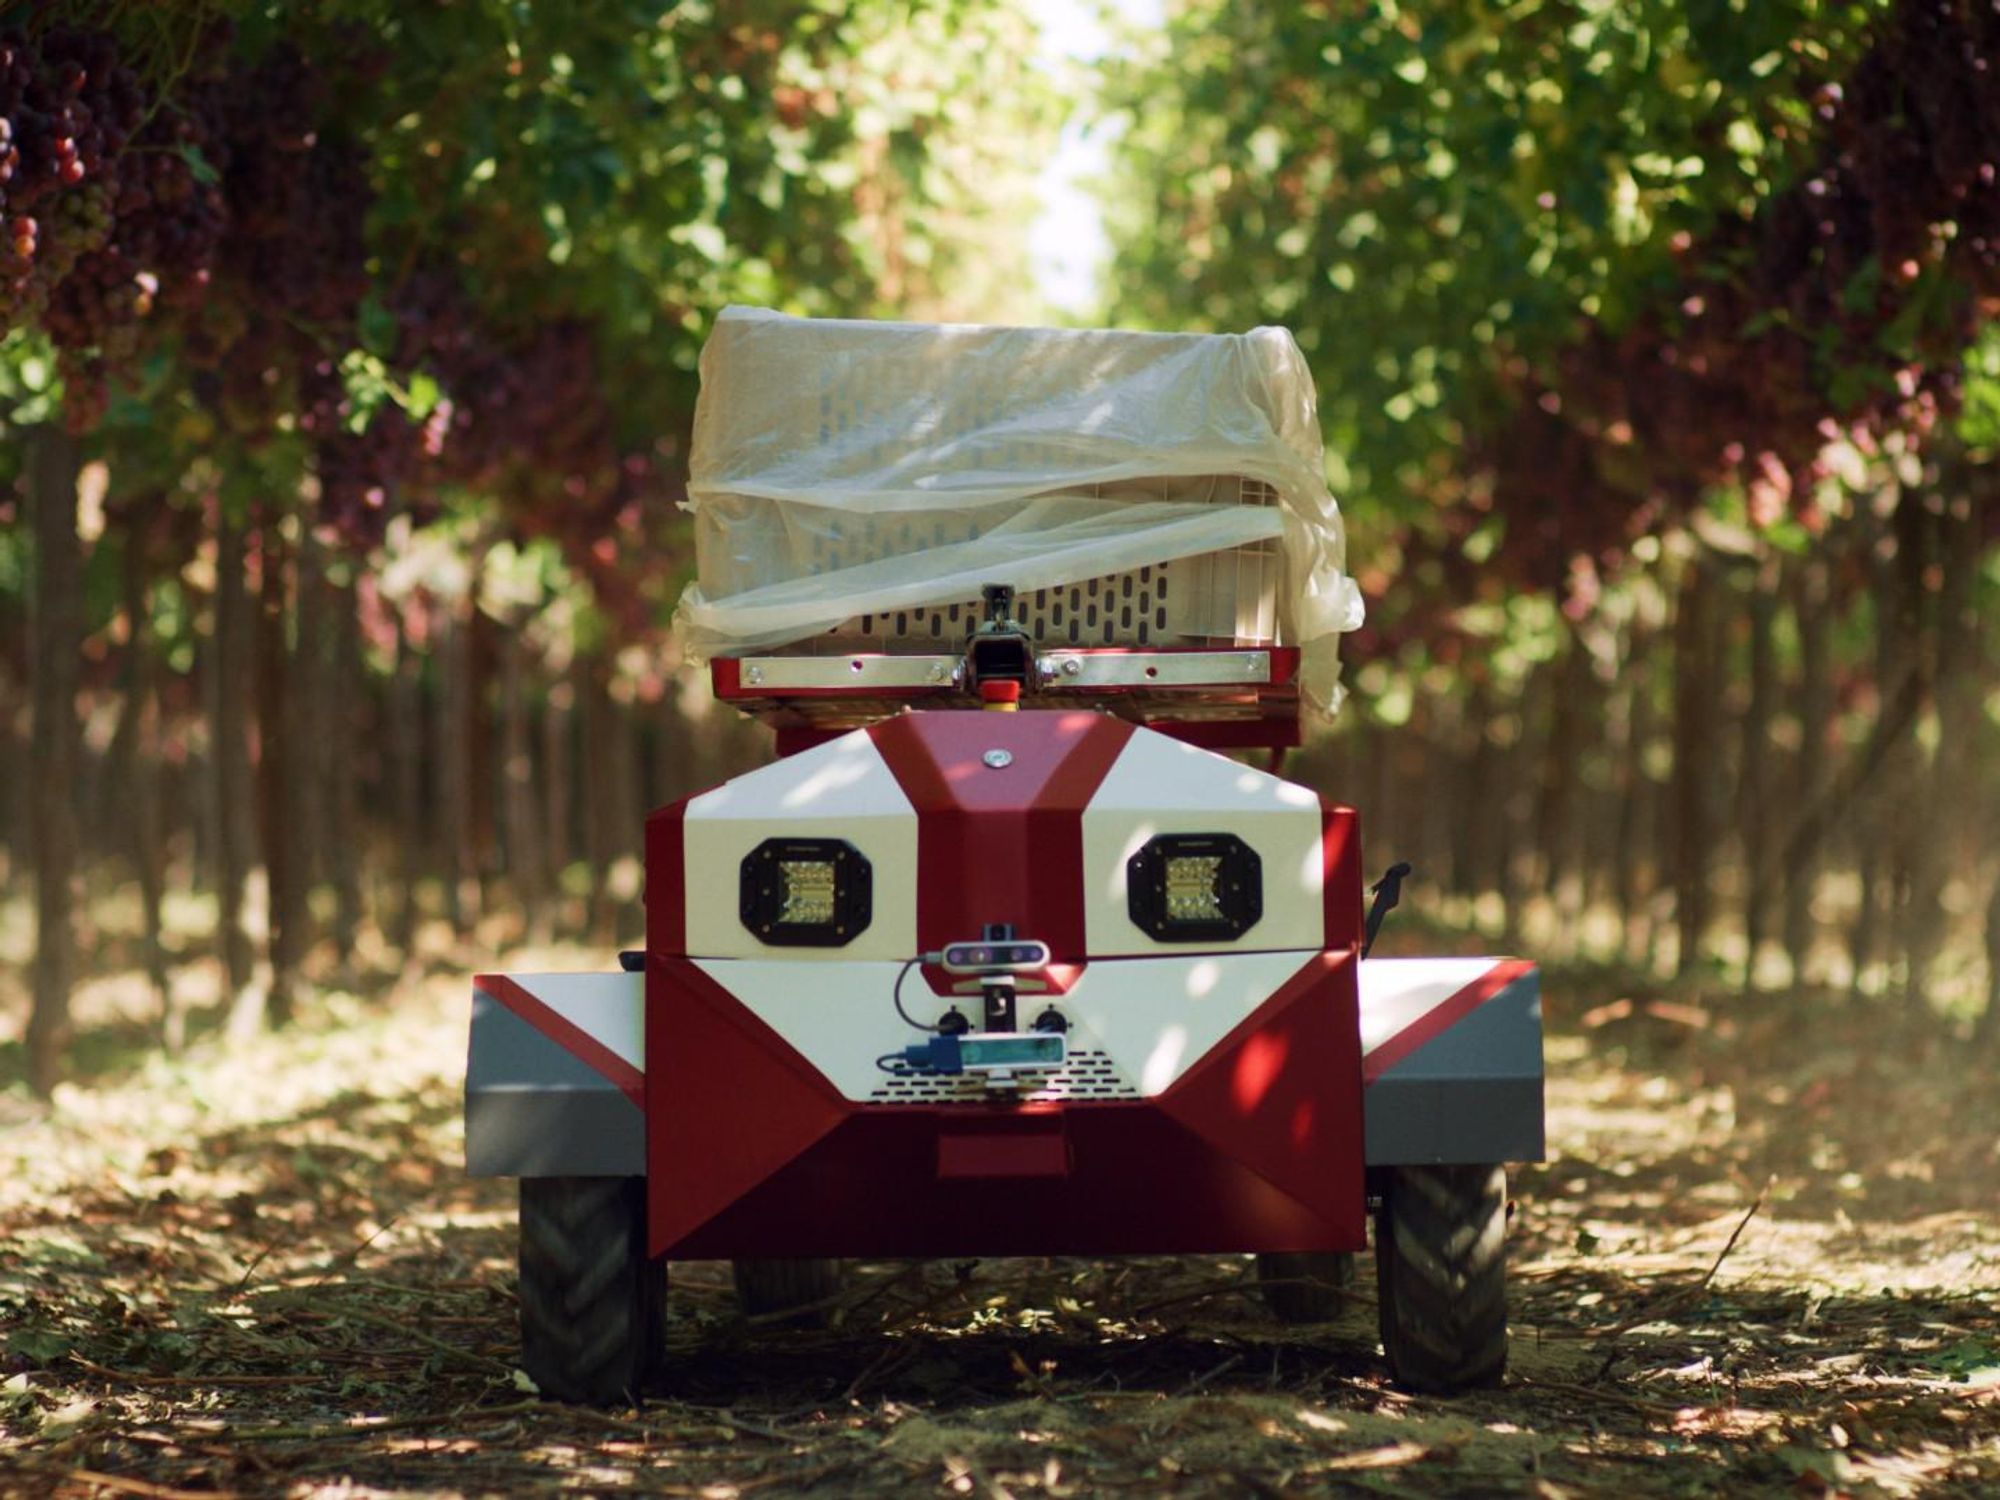 Meet Carry, the Robot That Aims to Make Picking Produce Easier for Small Farms